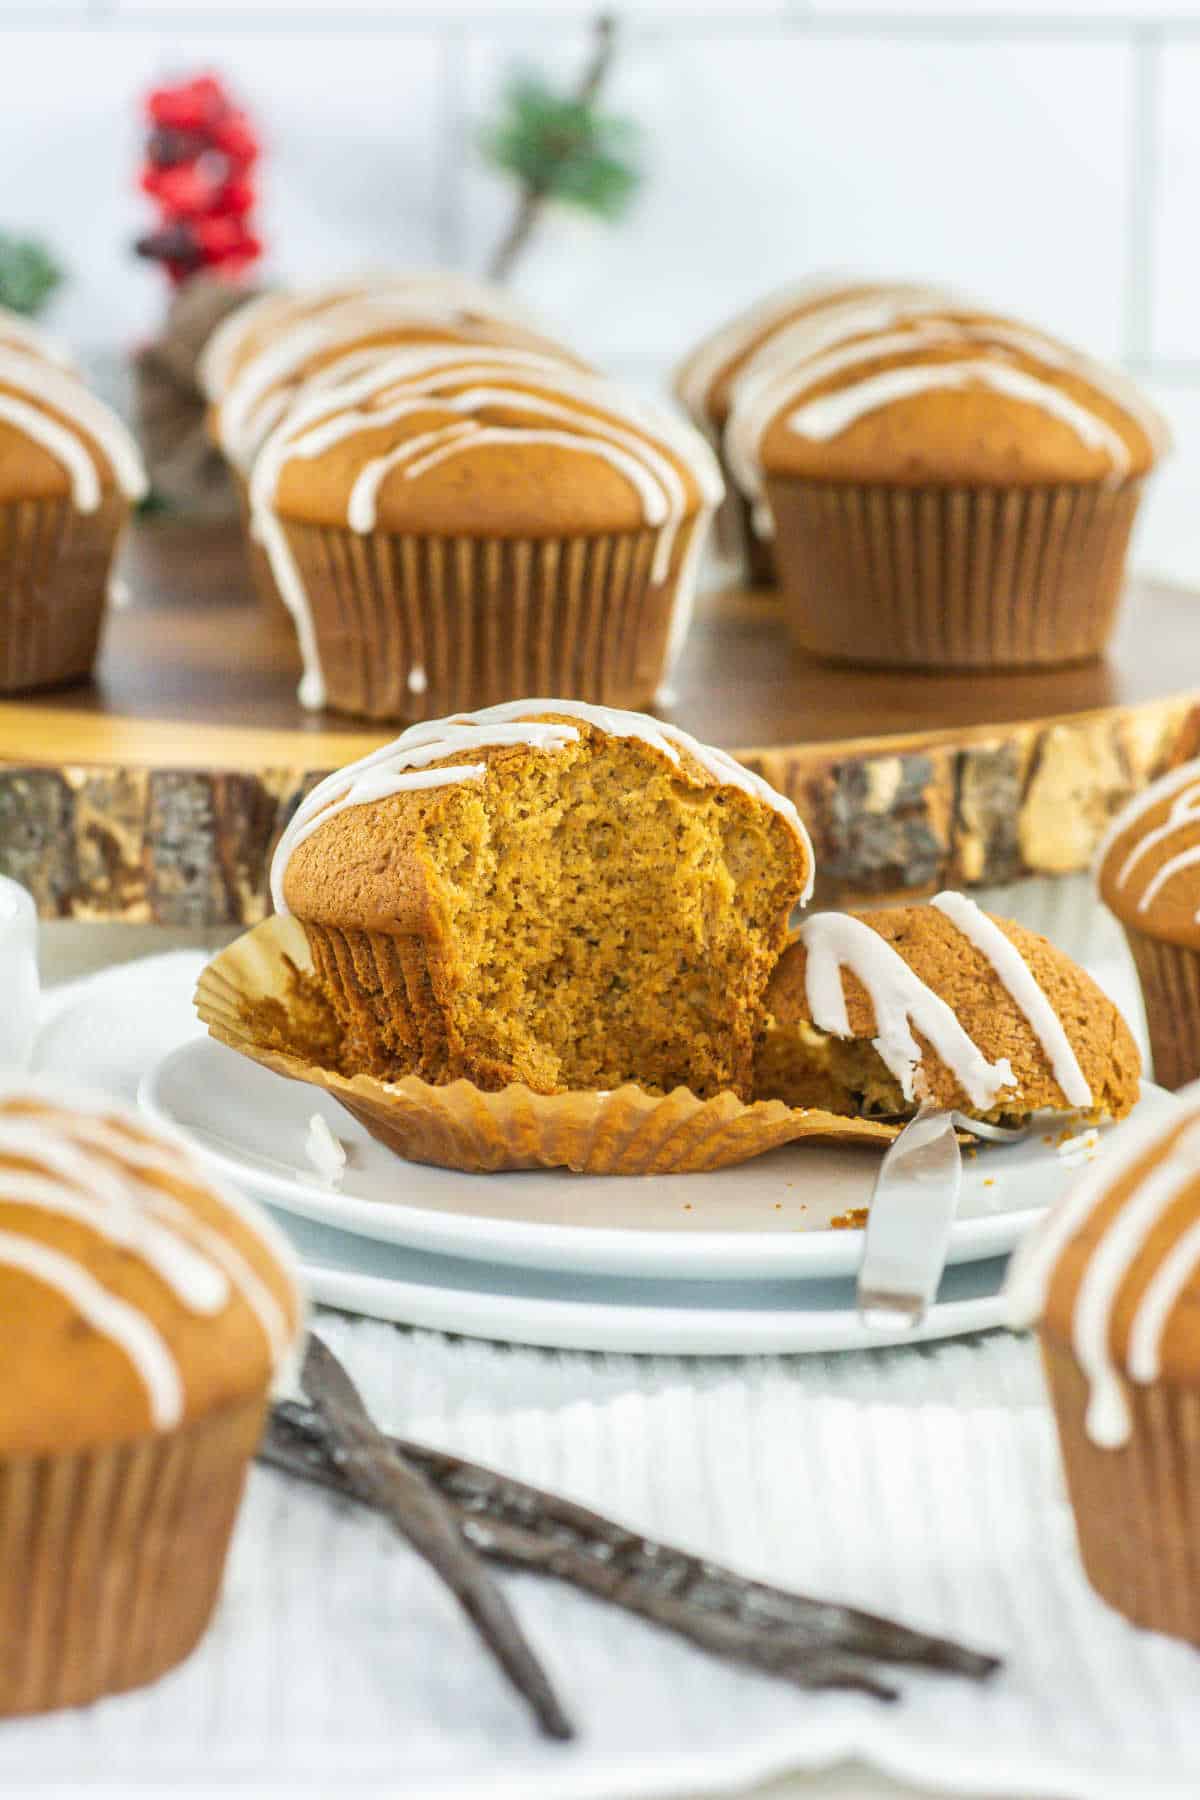 Gingerbread muffins with icing on a plate with a bite taken out.